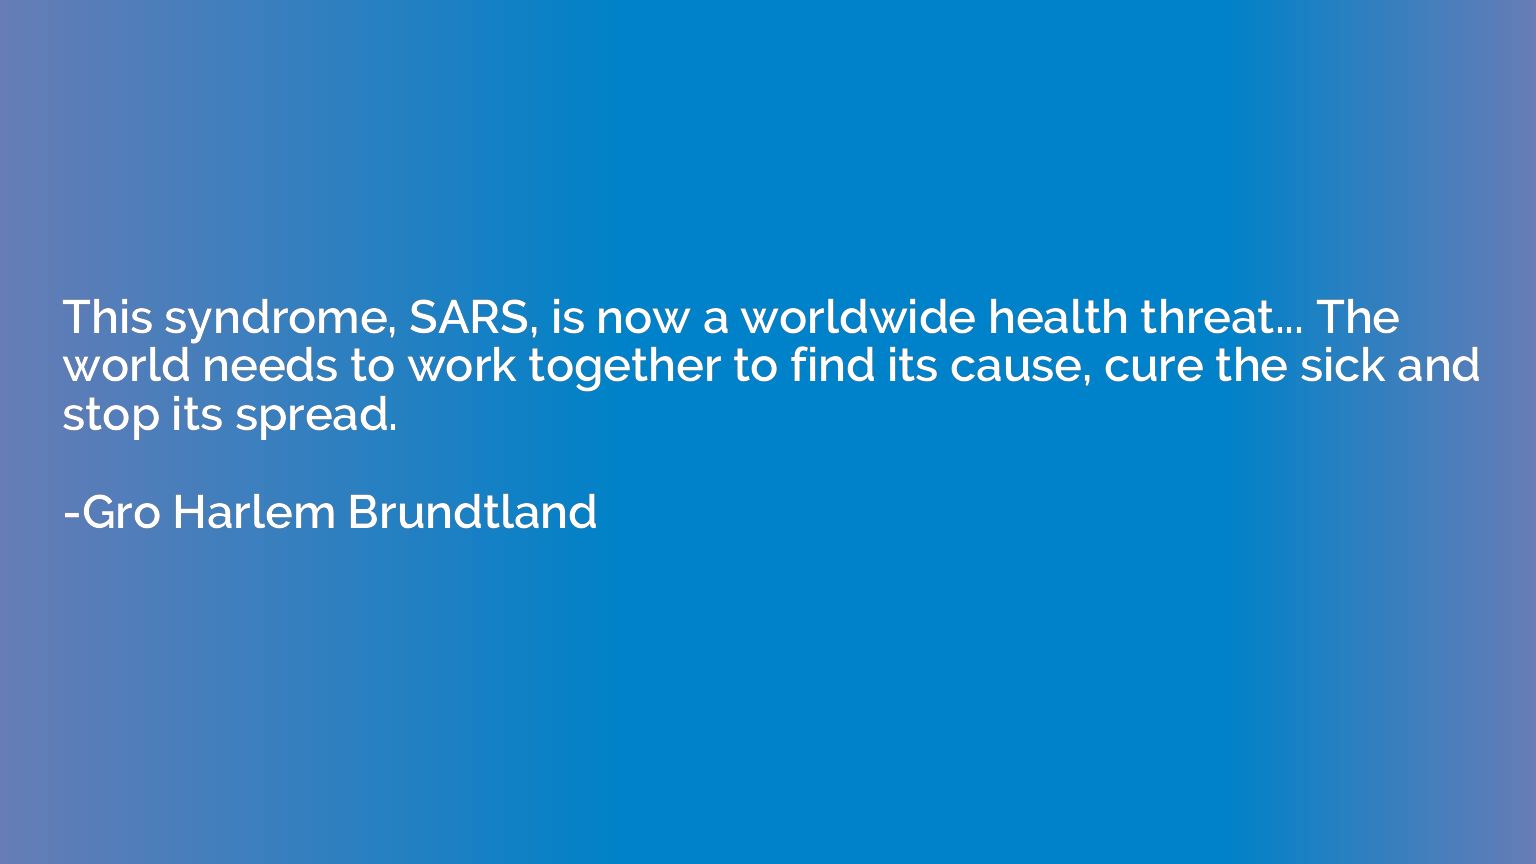 This syndrome, SARS, is now a worldwide health threat... The